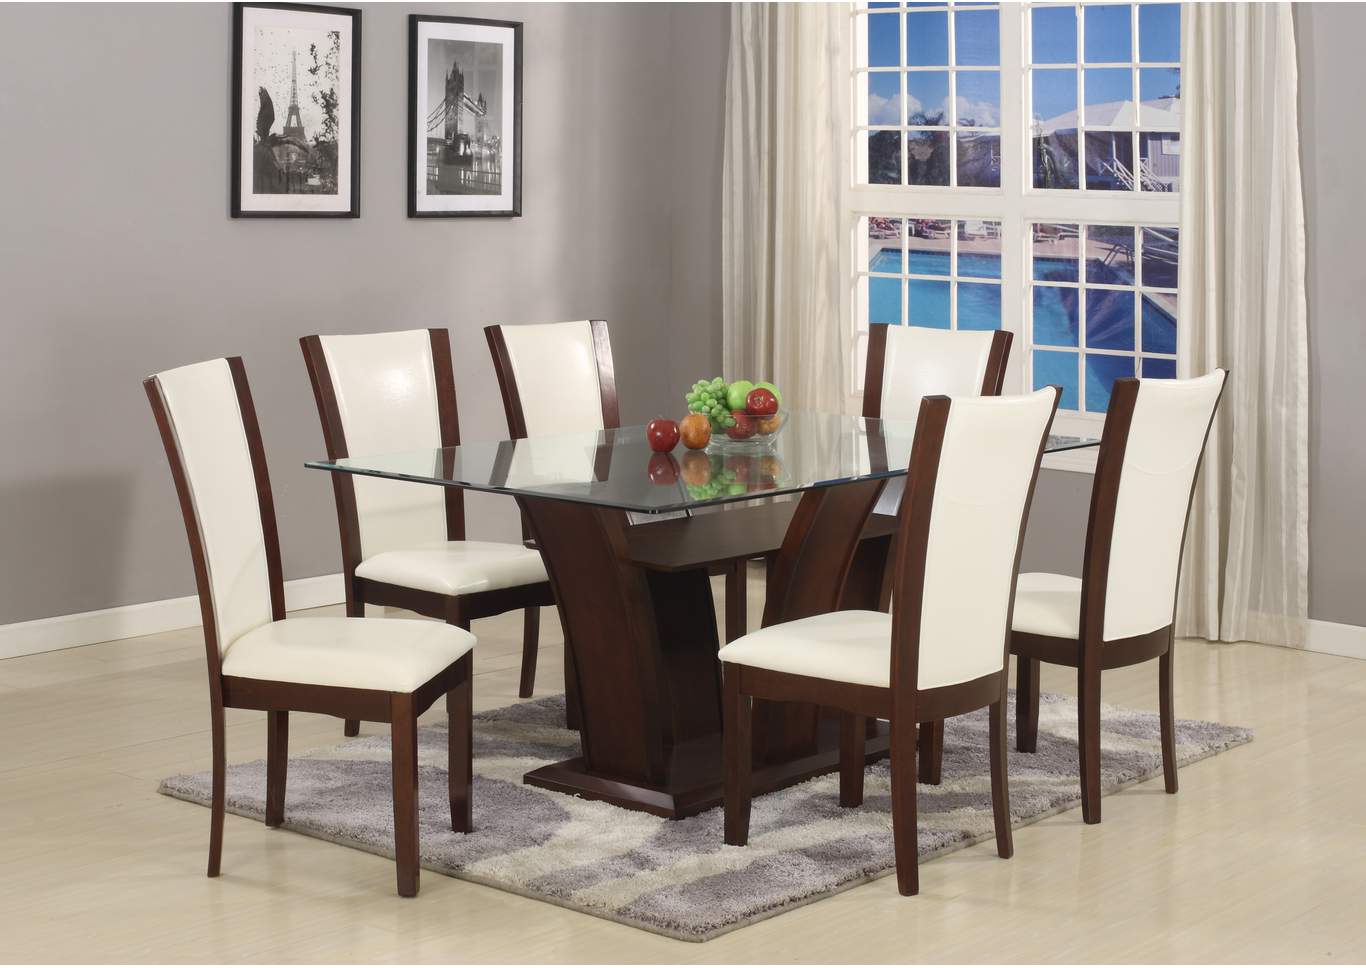 Camelia Rectangular Glass Top Dining, Dining Room Sets With Glass Table Tops